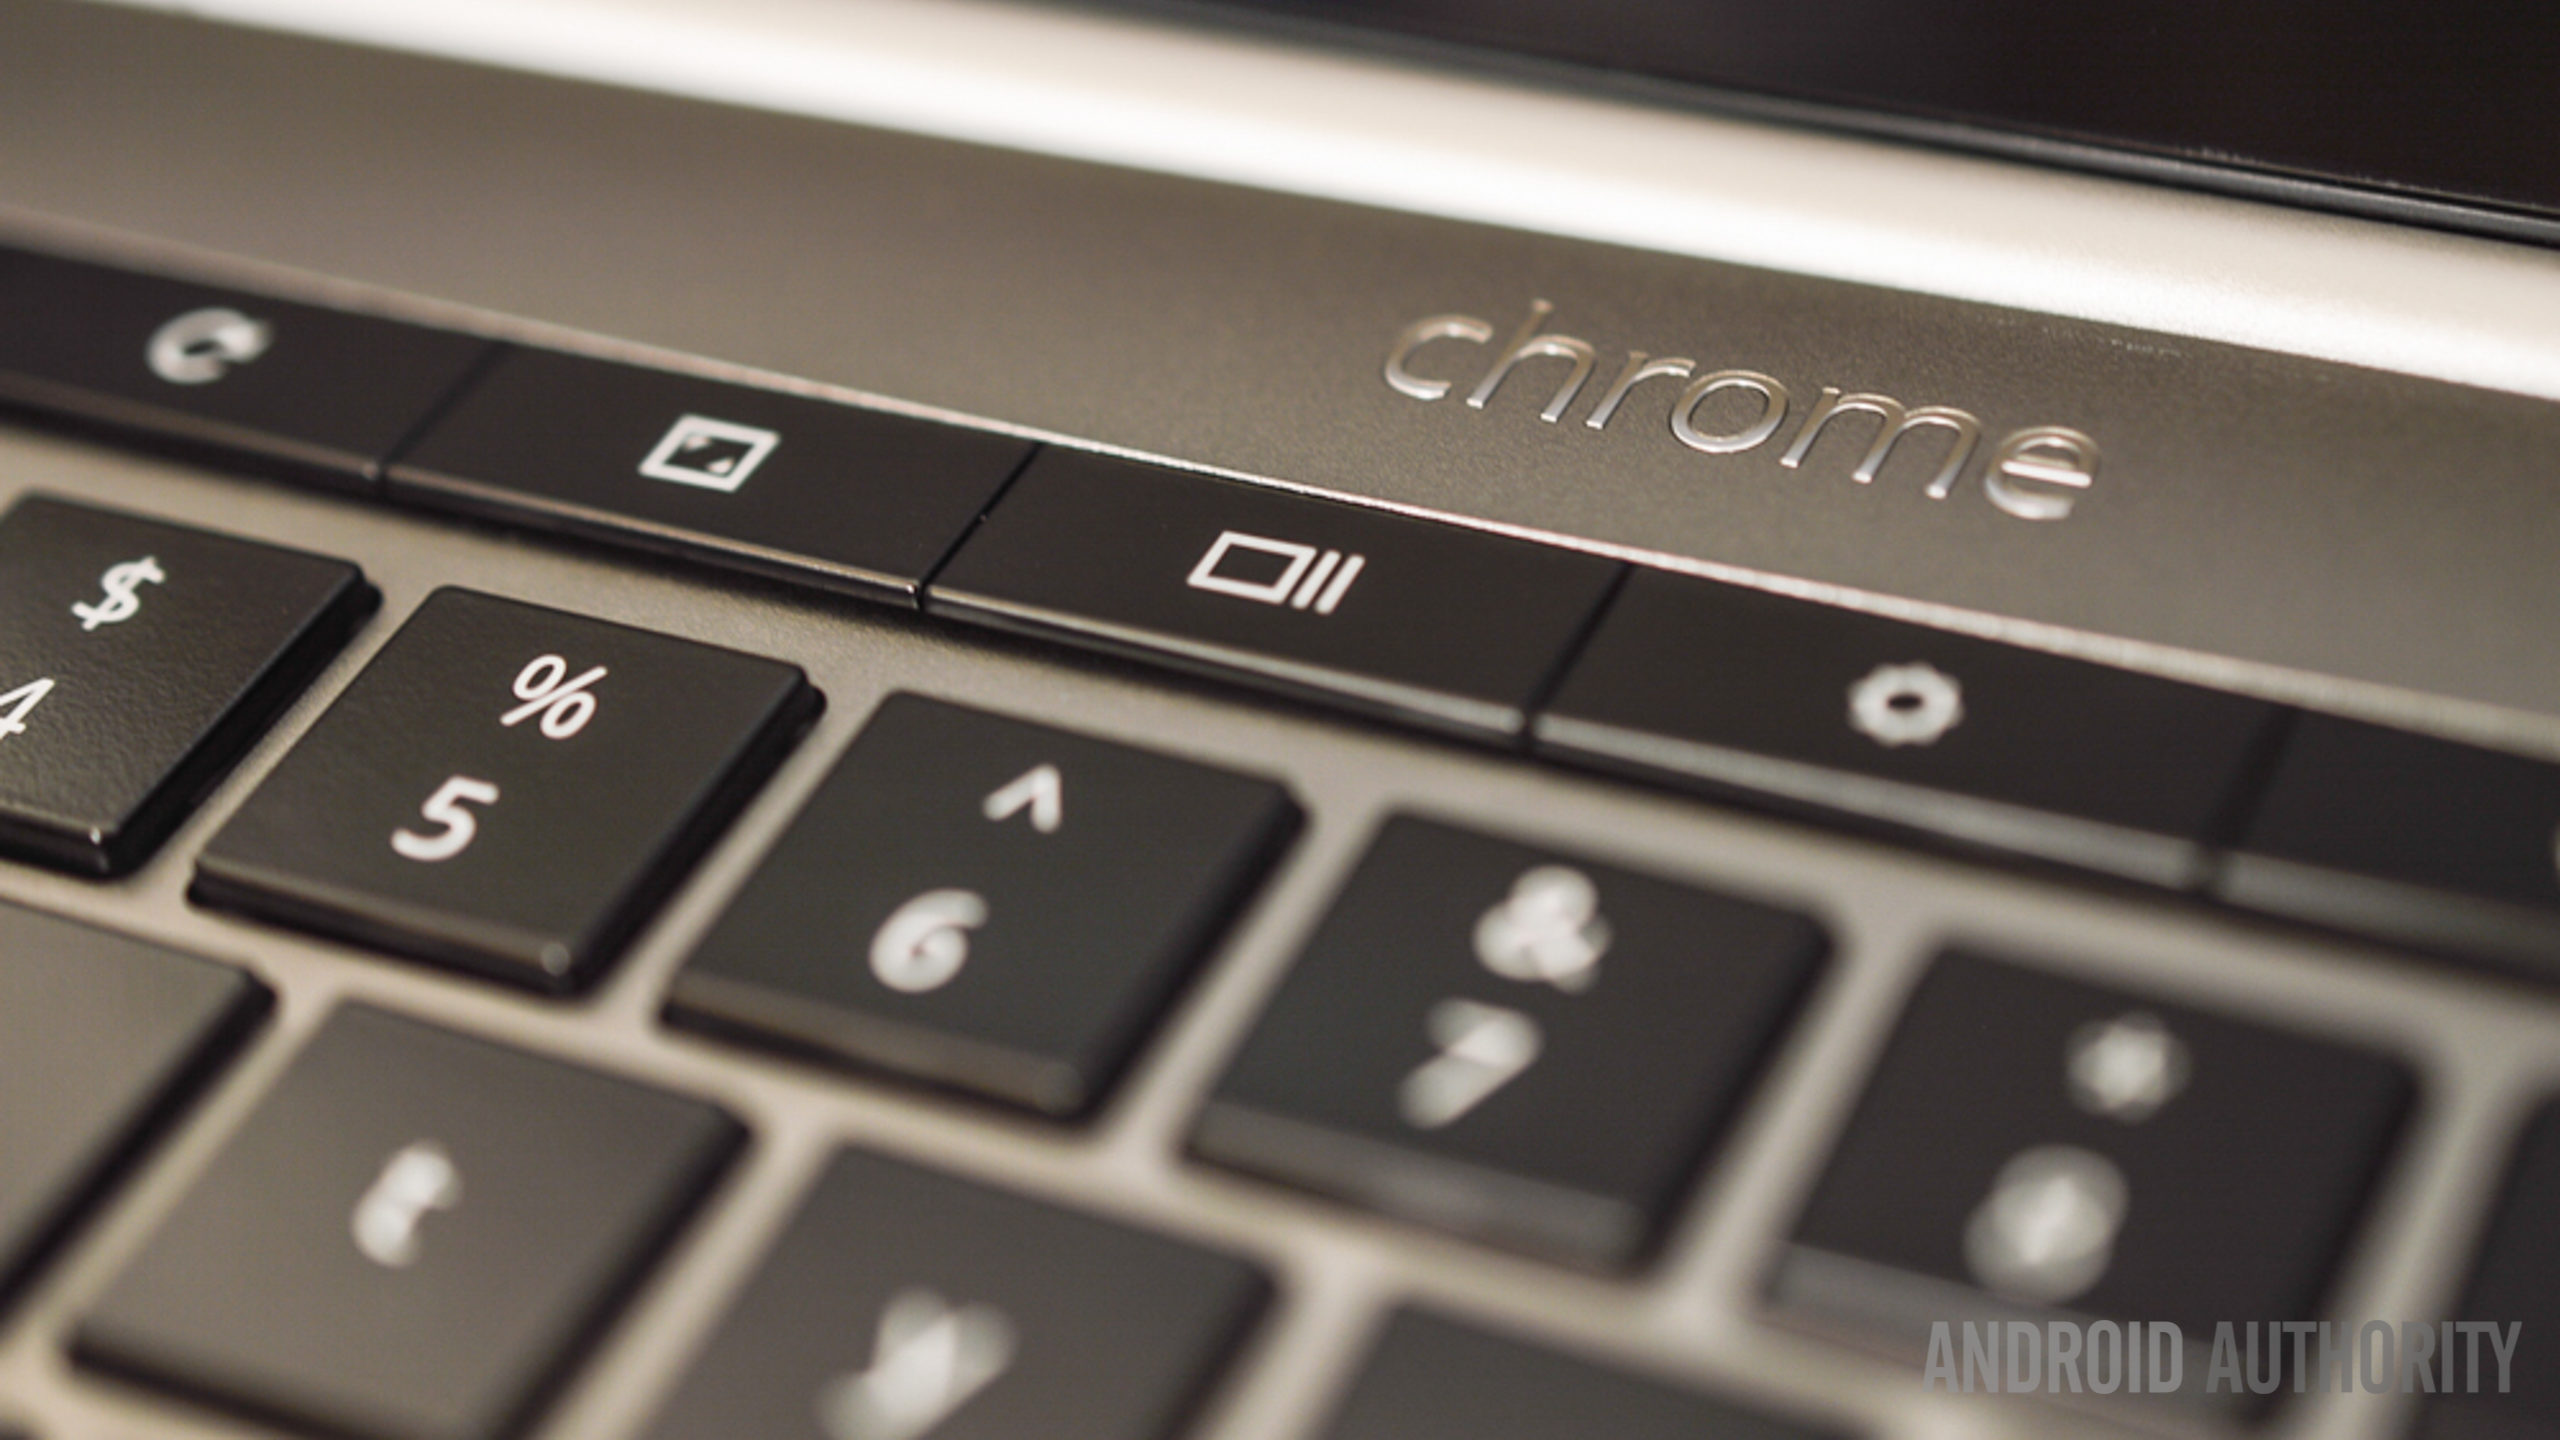 Chromebook Shortcuts And Touchpad Gestures You Should Know